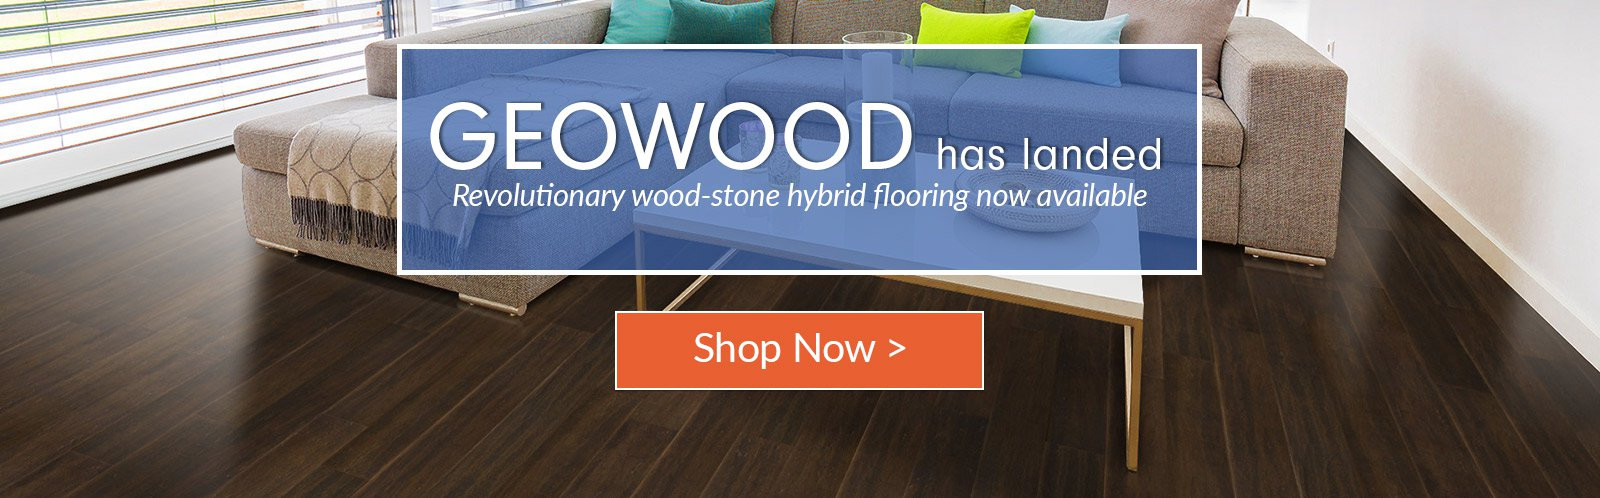 27 Spectacular Hardwood Flooring Green Bay 2024 free download hardwood flooring green bay of green building construction materials and home decor cali bamboo within geowood launch homepage slider